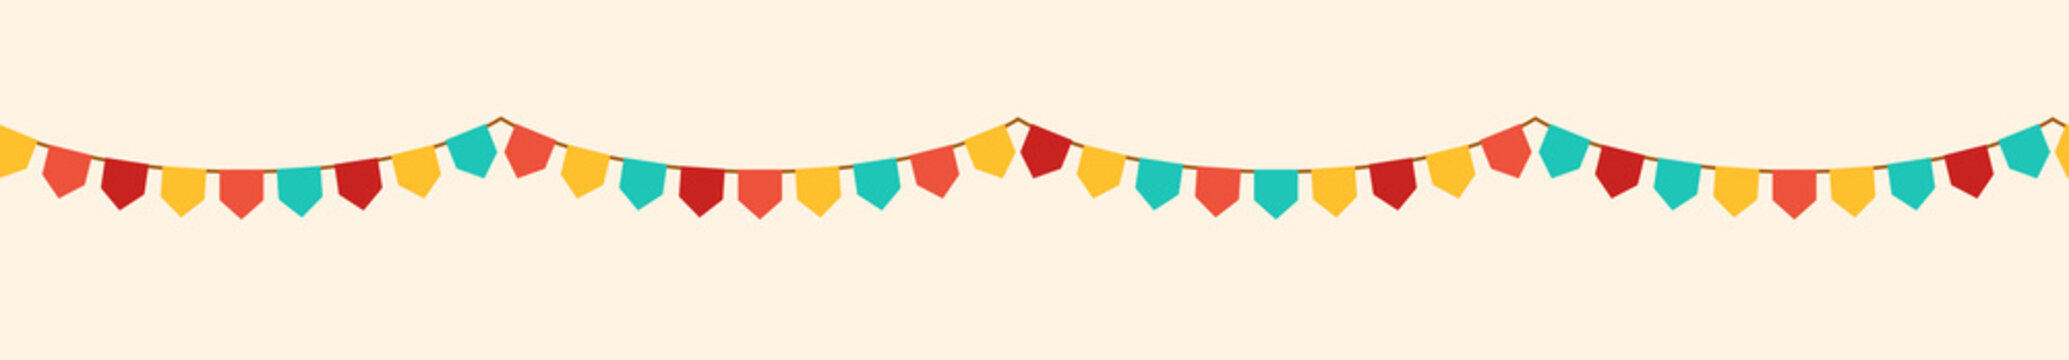 Color retro paper buntings garlands isolated on white background. Vector illustration. Seamless happy birthday banner, yellow and red fiesta border, carnival holiday header.